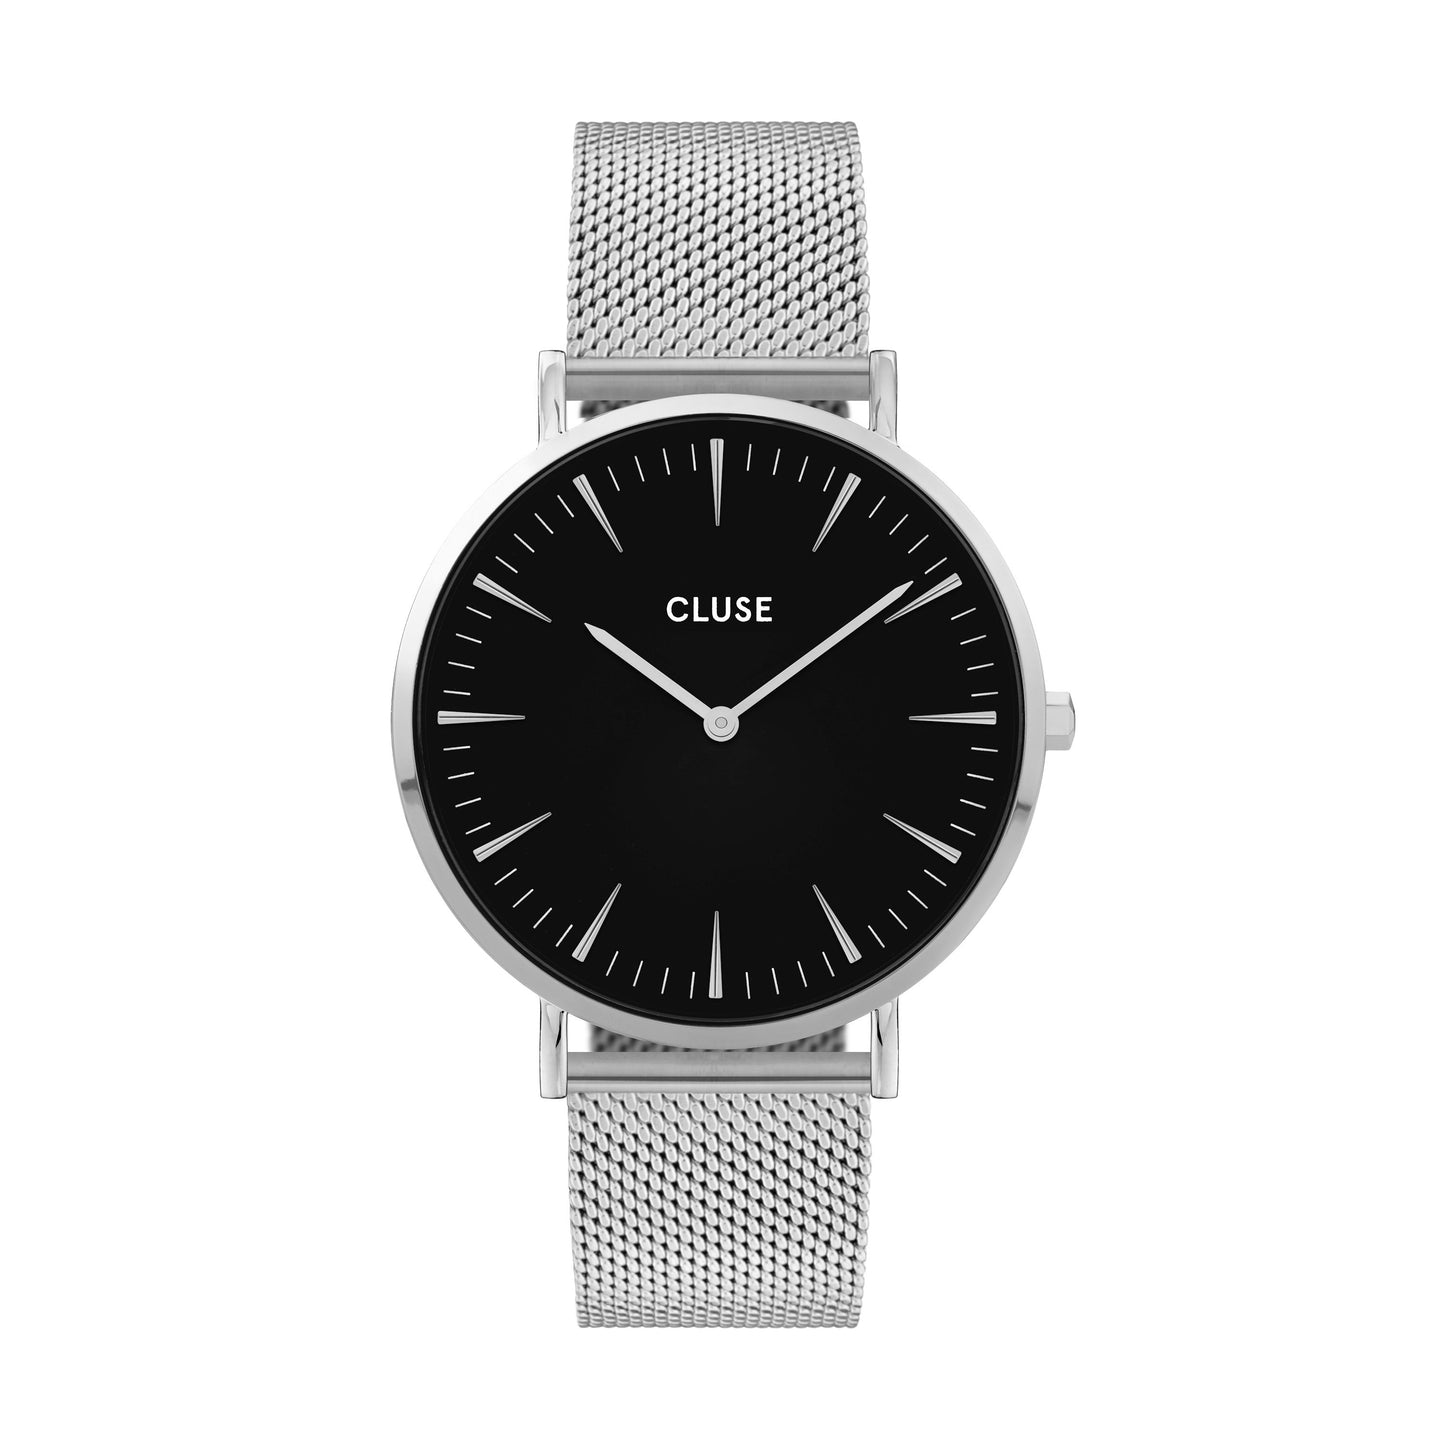 CLUSE SILVER BOHO CHIC WATCH